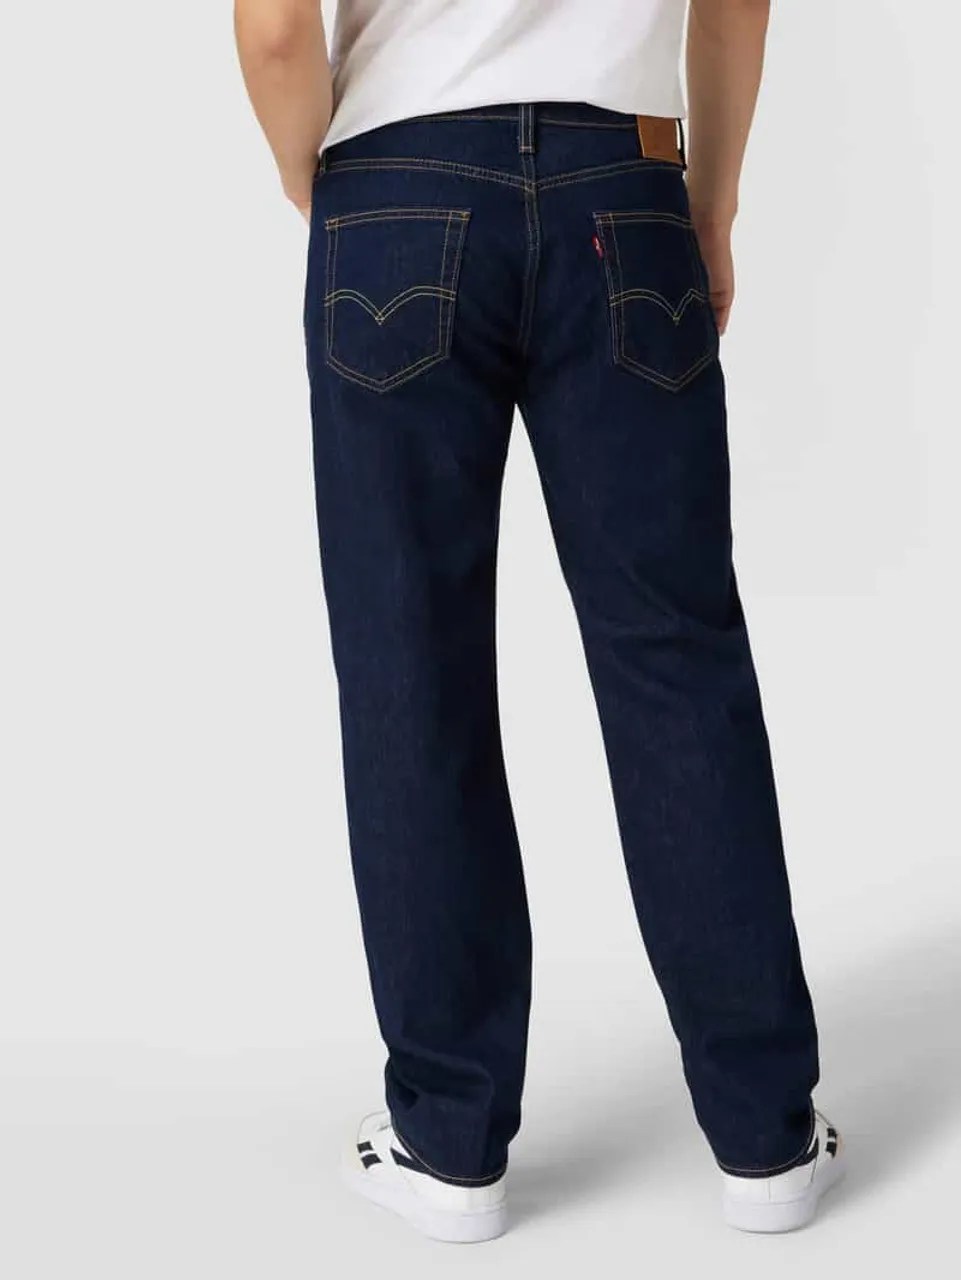 Levi's® Regular Fit Jeans mit Stretch-Anteil Modell Modell "514 CHAIN RISE" in Jeansblau